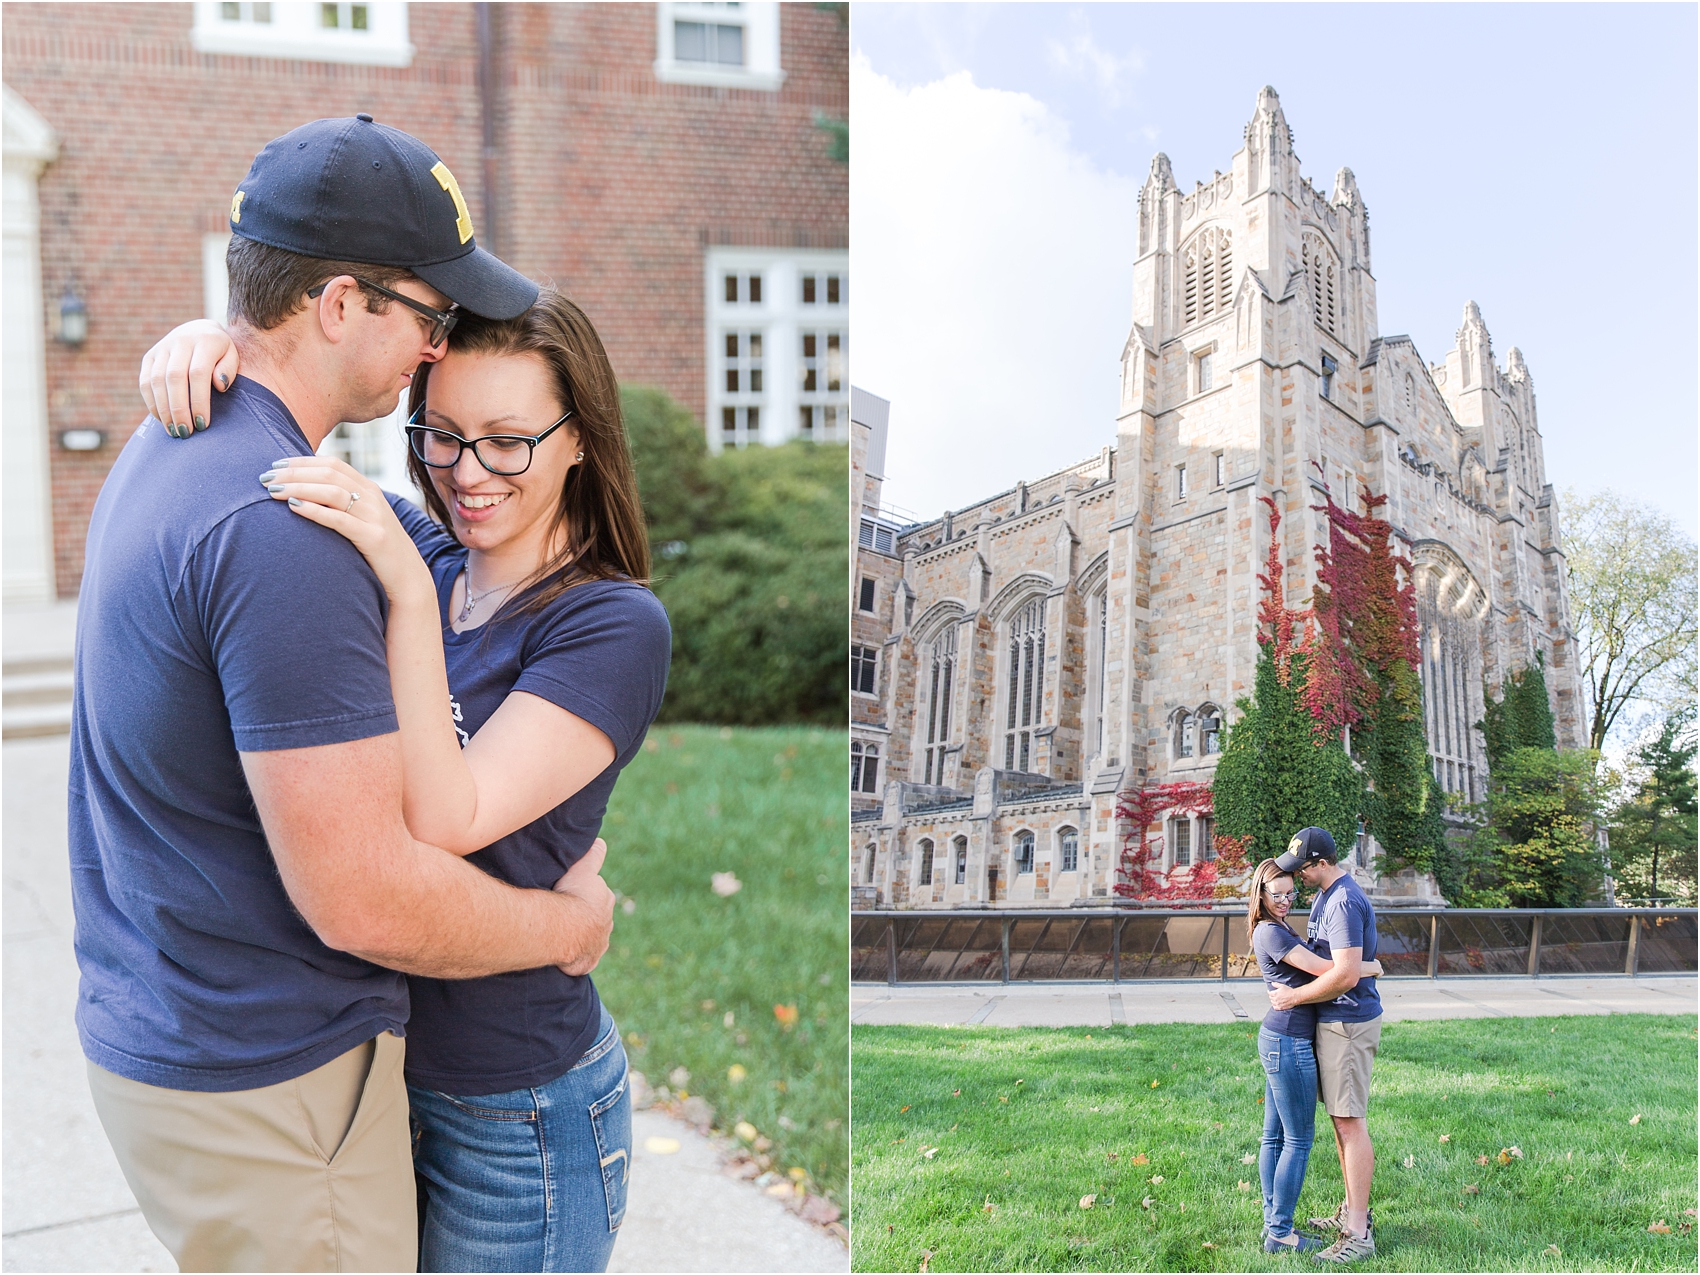 classic-fall-engagement-photos-at-the-university-of-michigan-in-ann-arbor-mi-by-courtney-carolyn-photography_0018.jpg